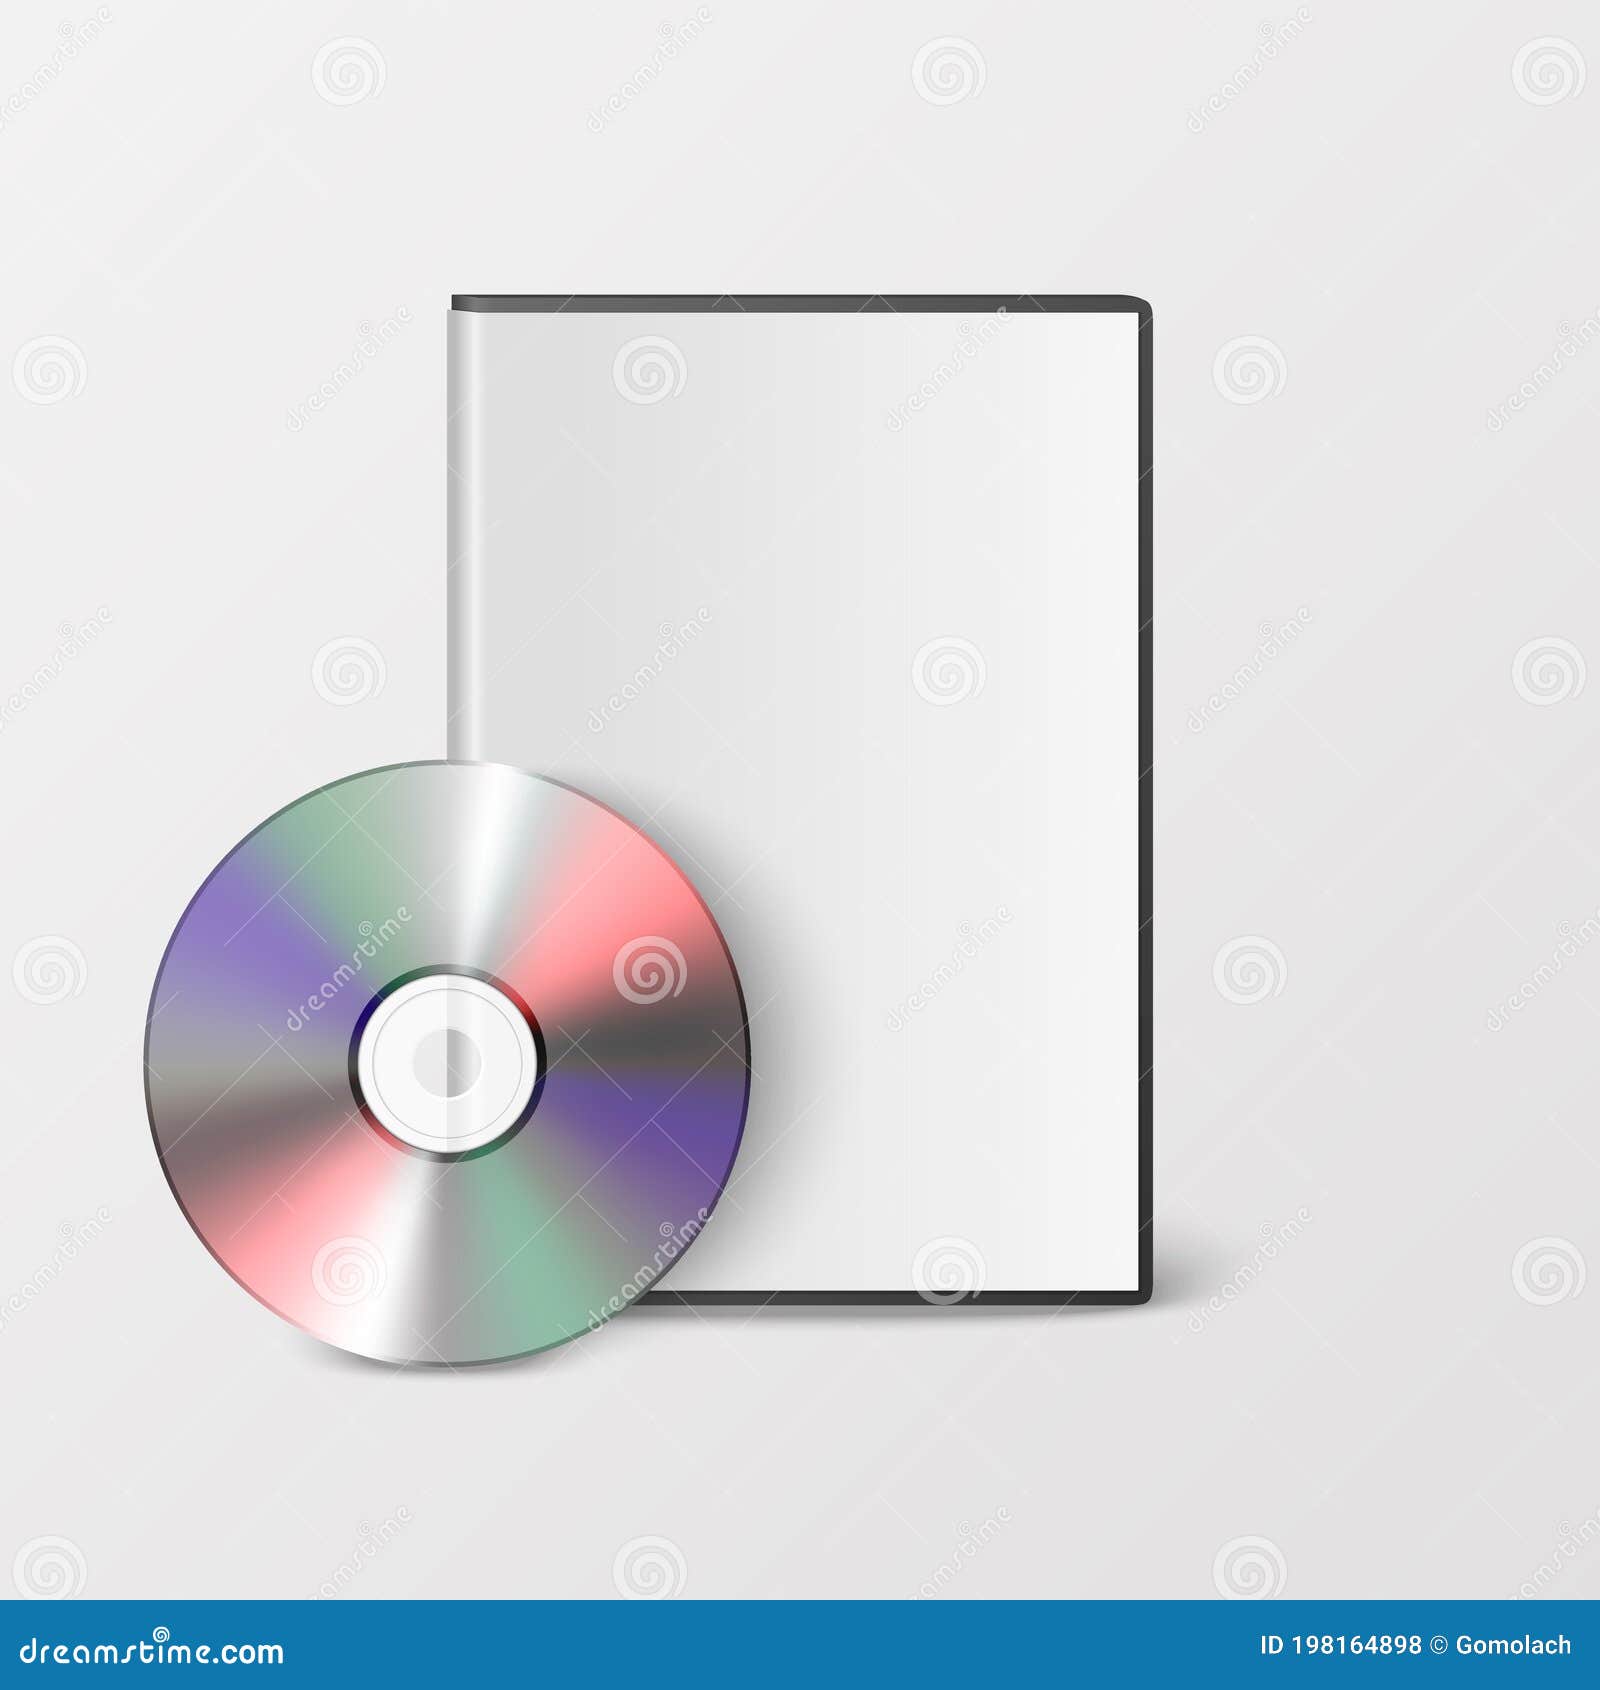 Dvd Disc And Box Template On Plain Background Stock Illustration